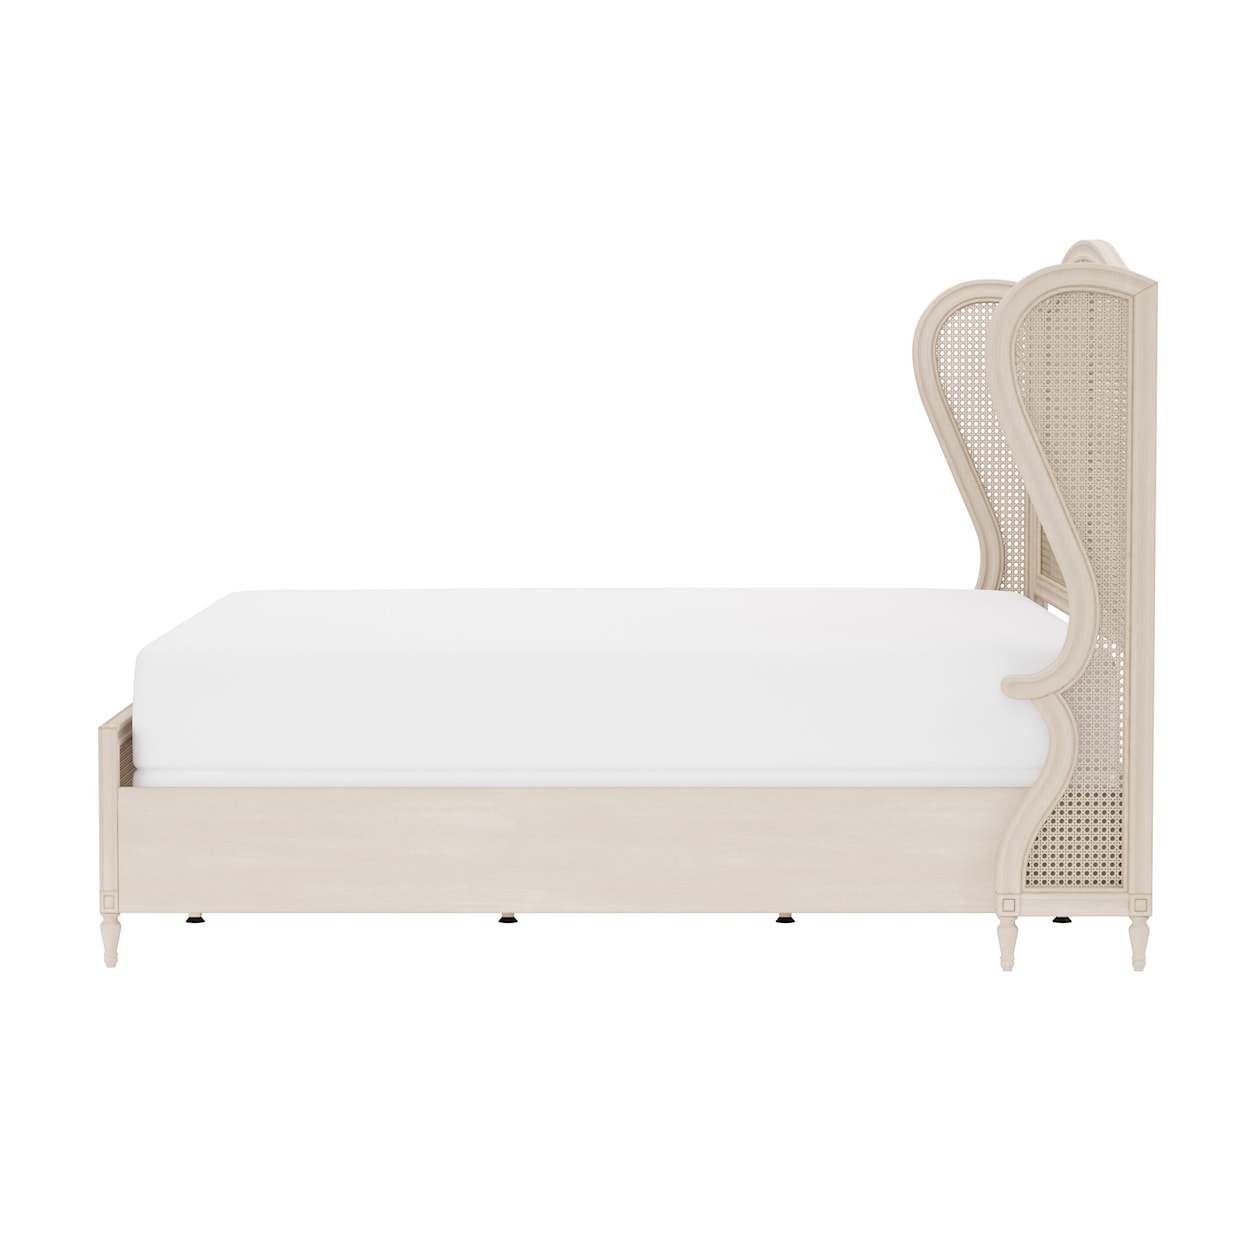 Hillsdale Sausalito King Bed